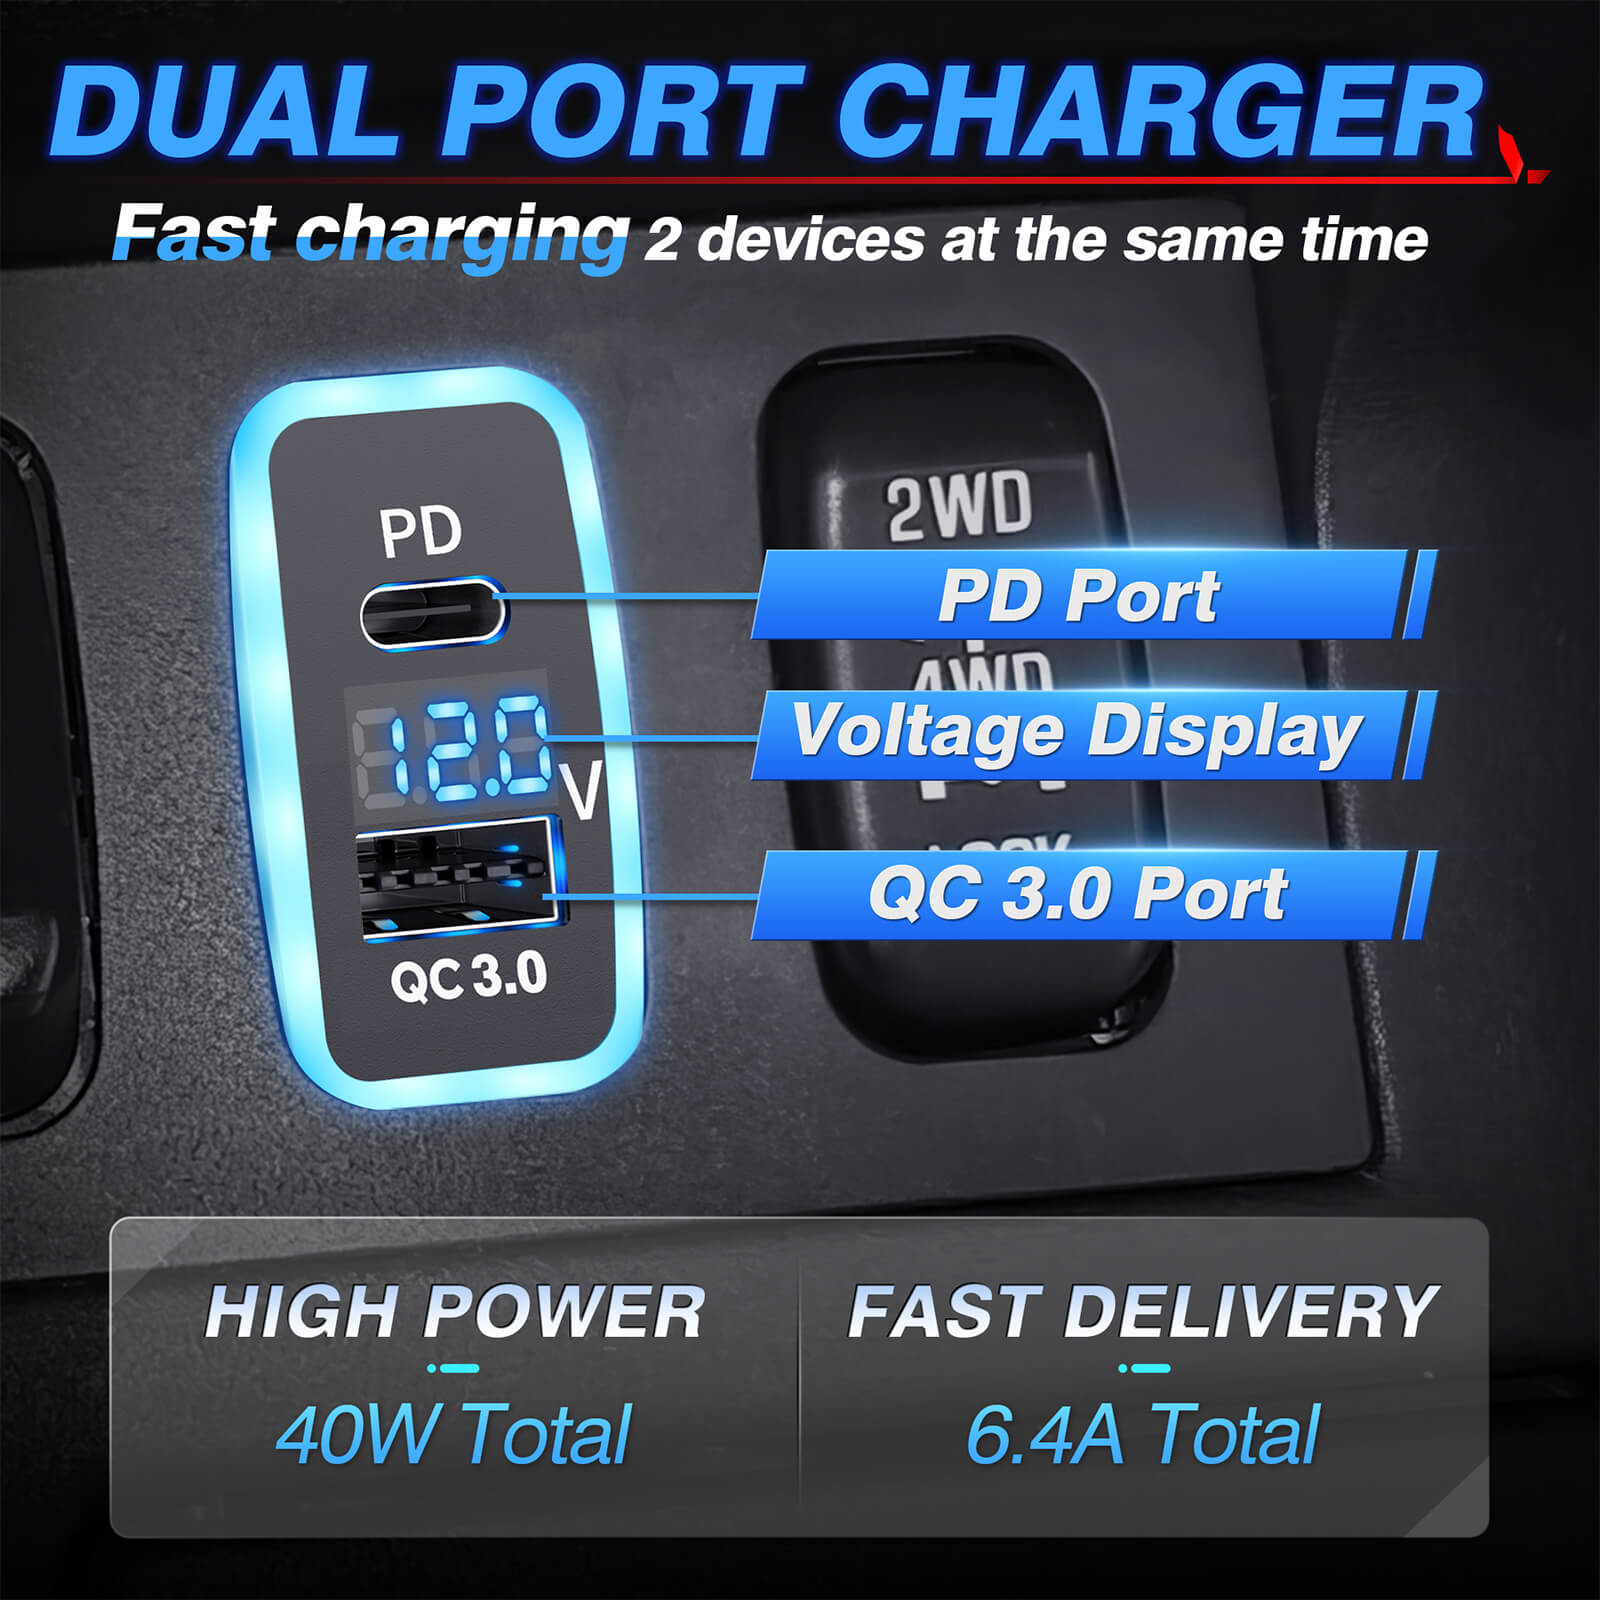 Multi Ports USB Car Charger, 96W 6 Port QC3.0 Fast Adapter Multiple Ports,  with Four Quick Charge 3.0 Port, 12V-24V Multi Device Cigarette Lighter for  Smart Phone & Tablets Charging 